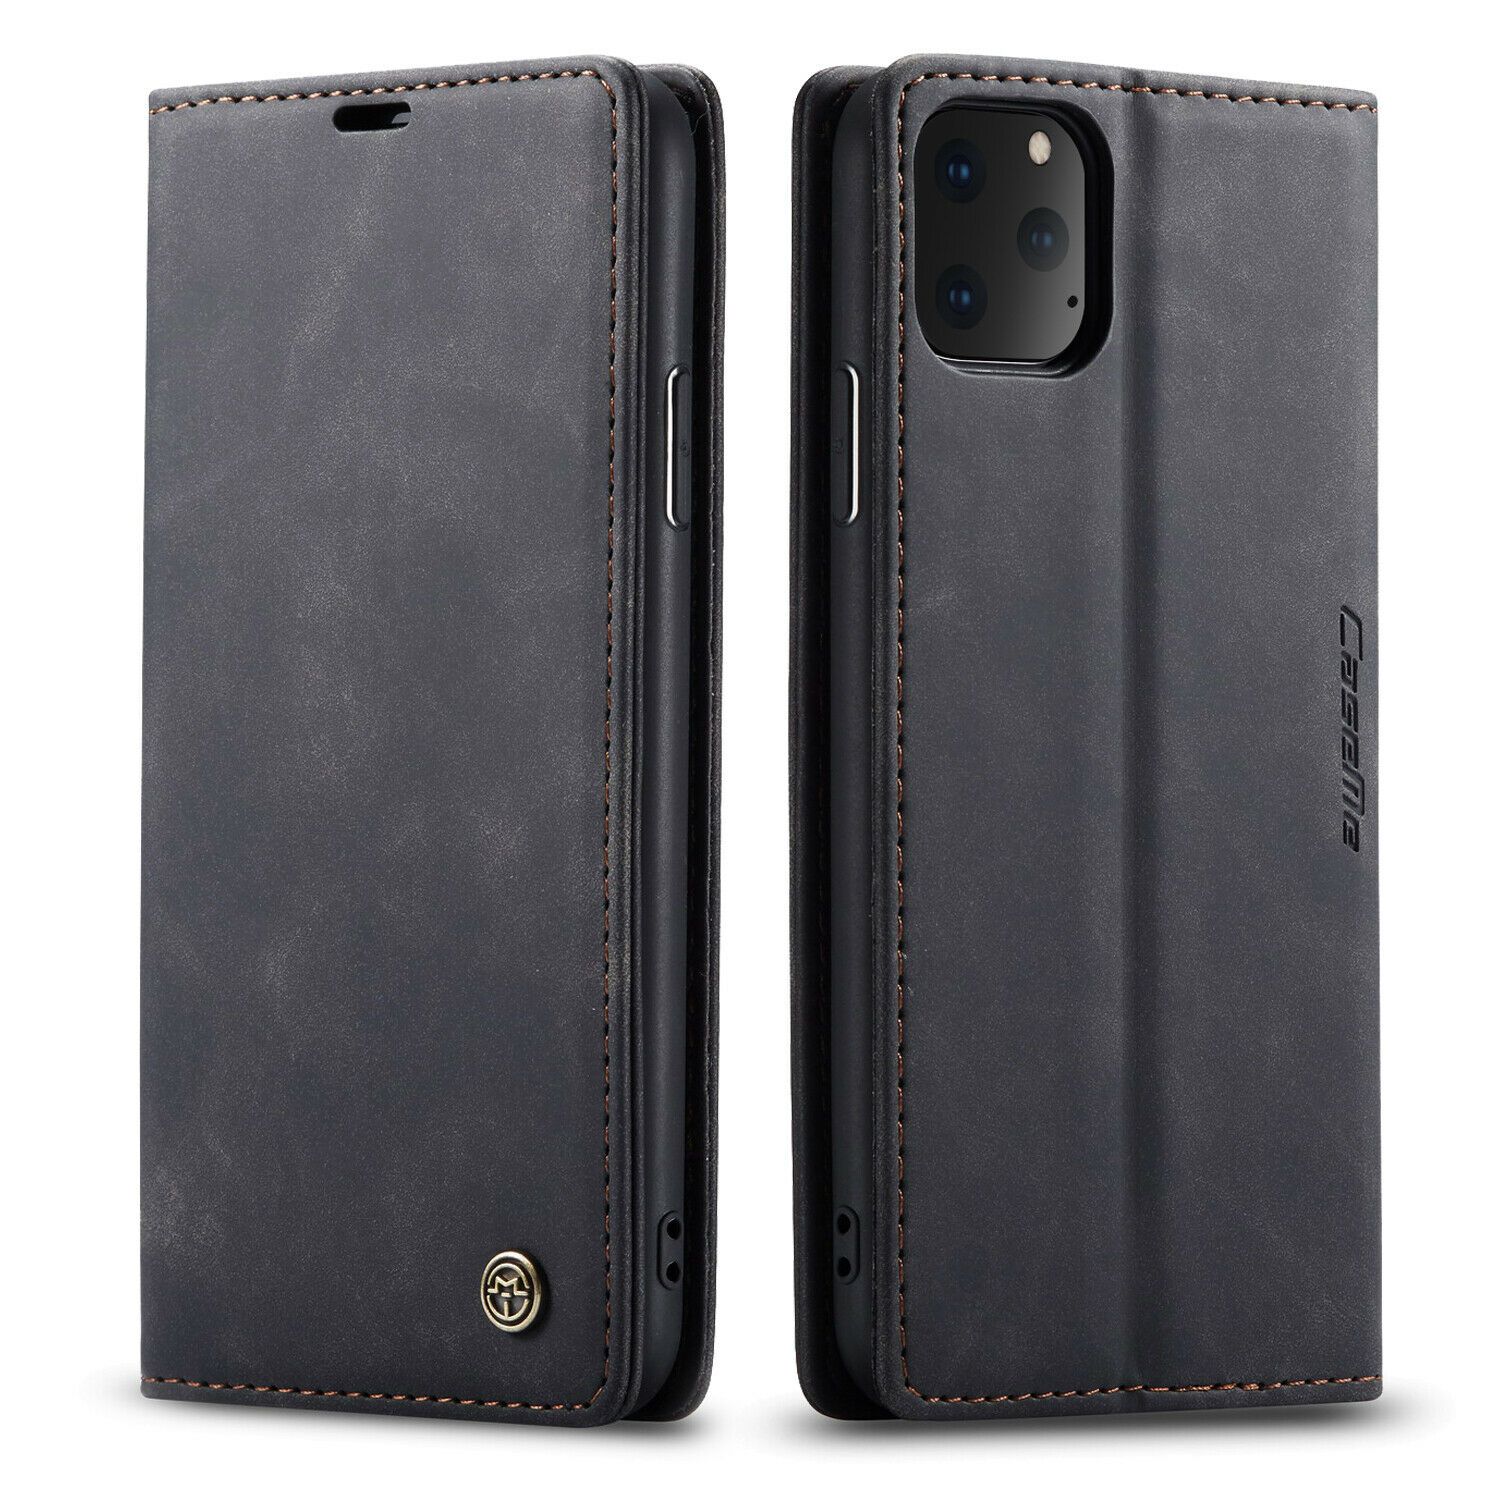 iPhone 11 Pro XS Max XR X 8 7 Plus Case Magnetic Leather Wallet Flip Stand Cover 2000eseller For Apple iPhone XS Max Black 